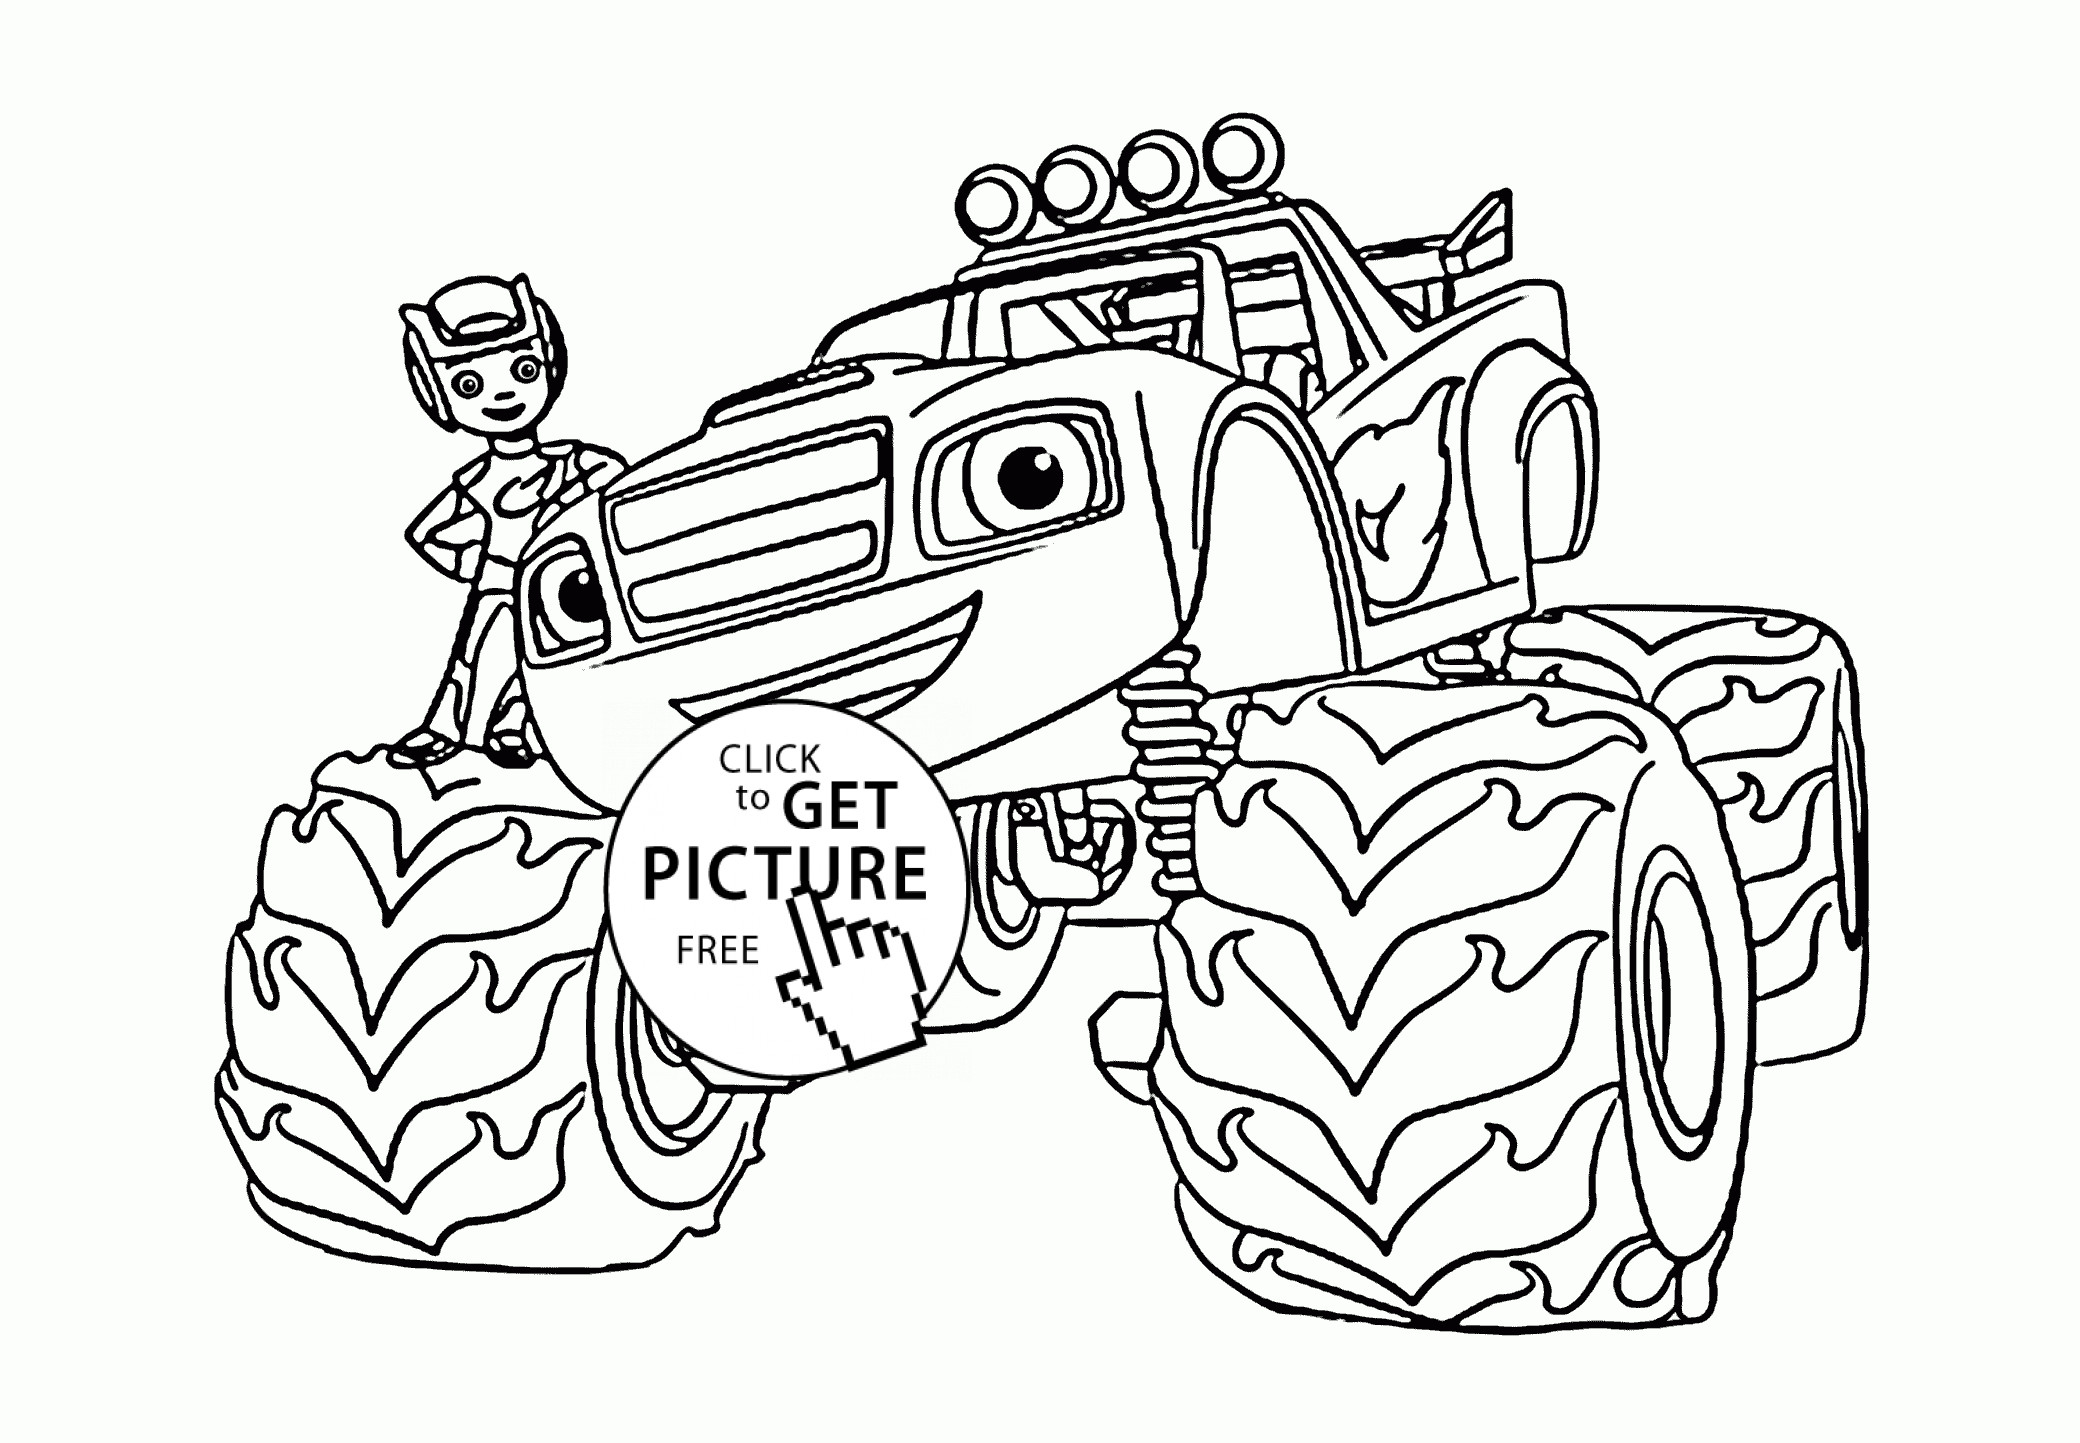 Boys Printable Coloring Pages
 Blaze Monster Truck with Boy coloring page for kids